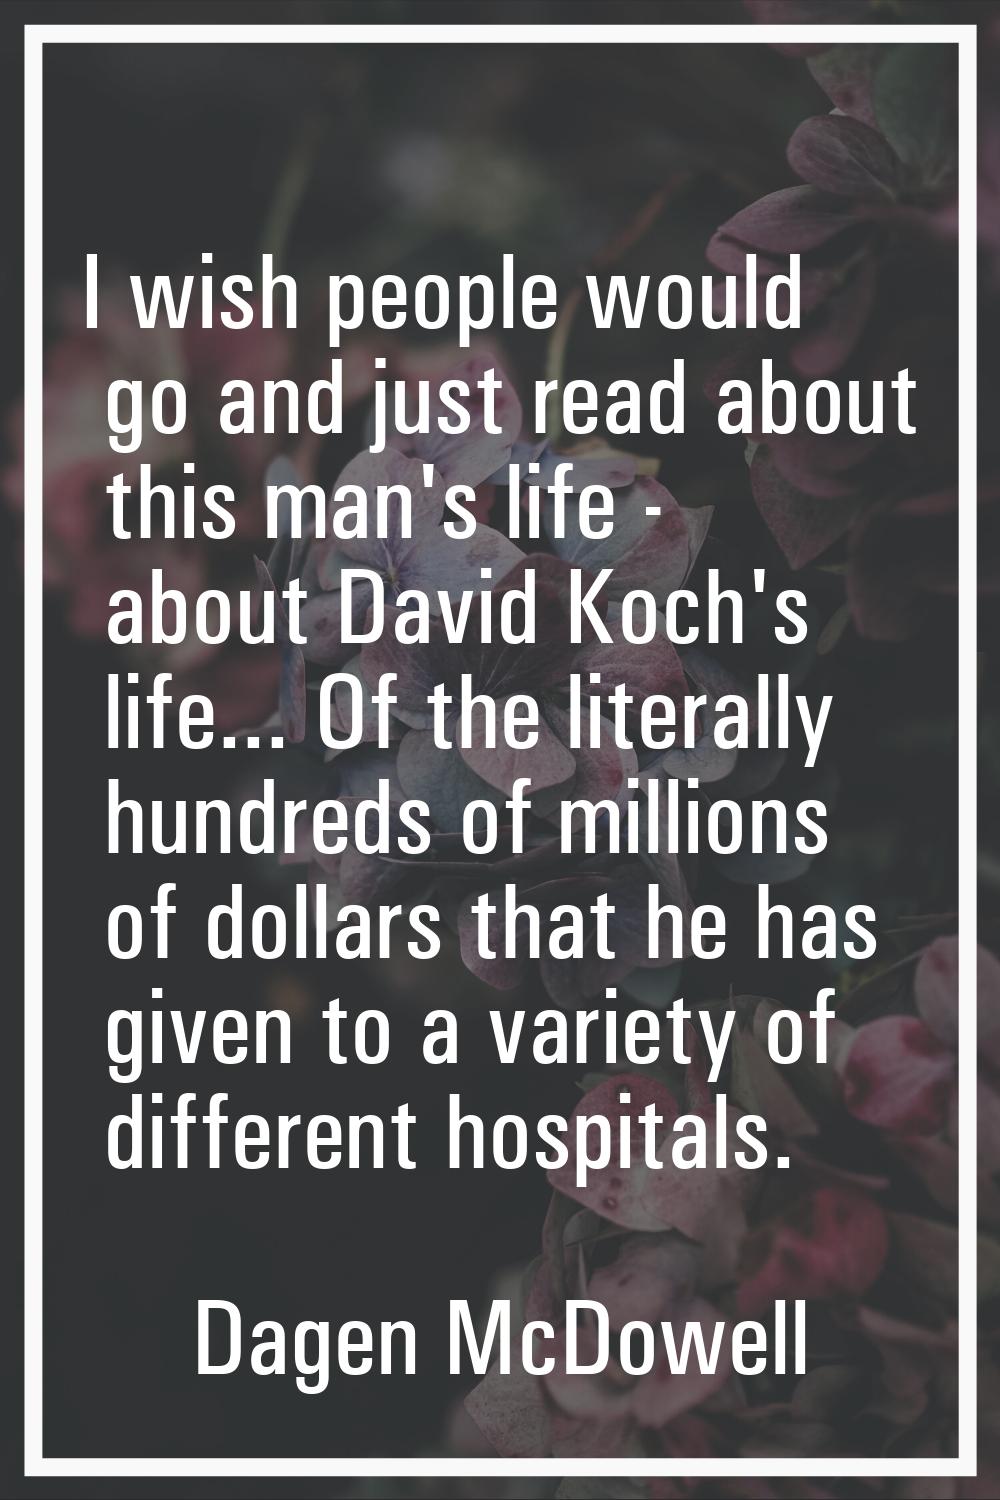 I wish people would go and just read about this man's life - about David Koch's life... Of the lite